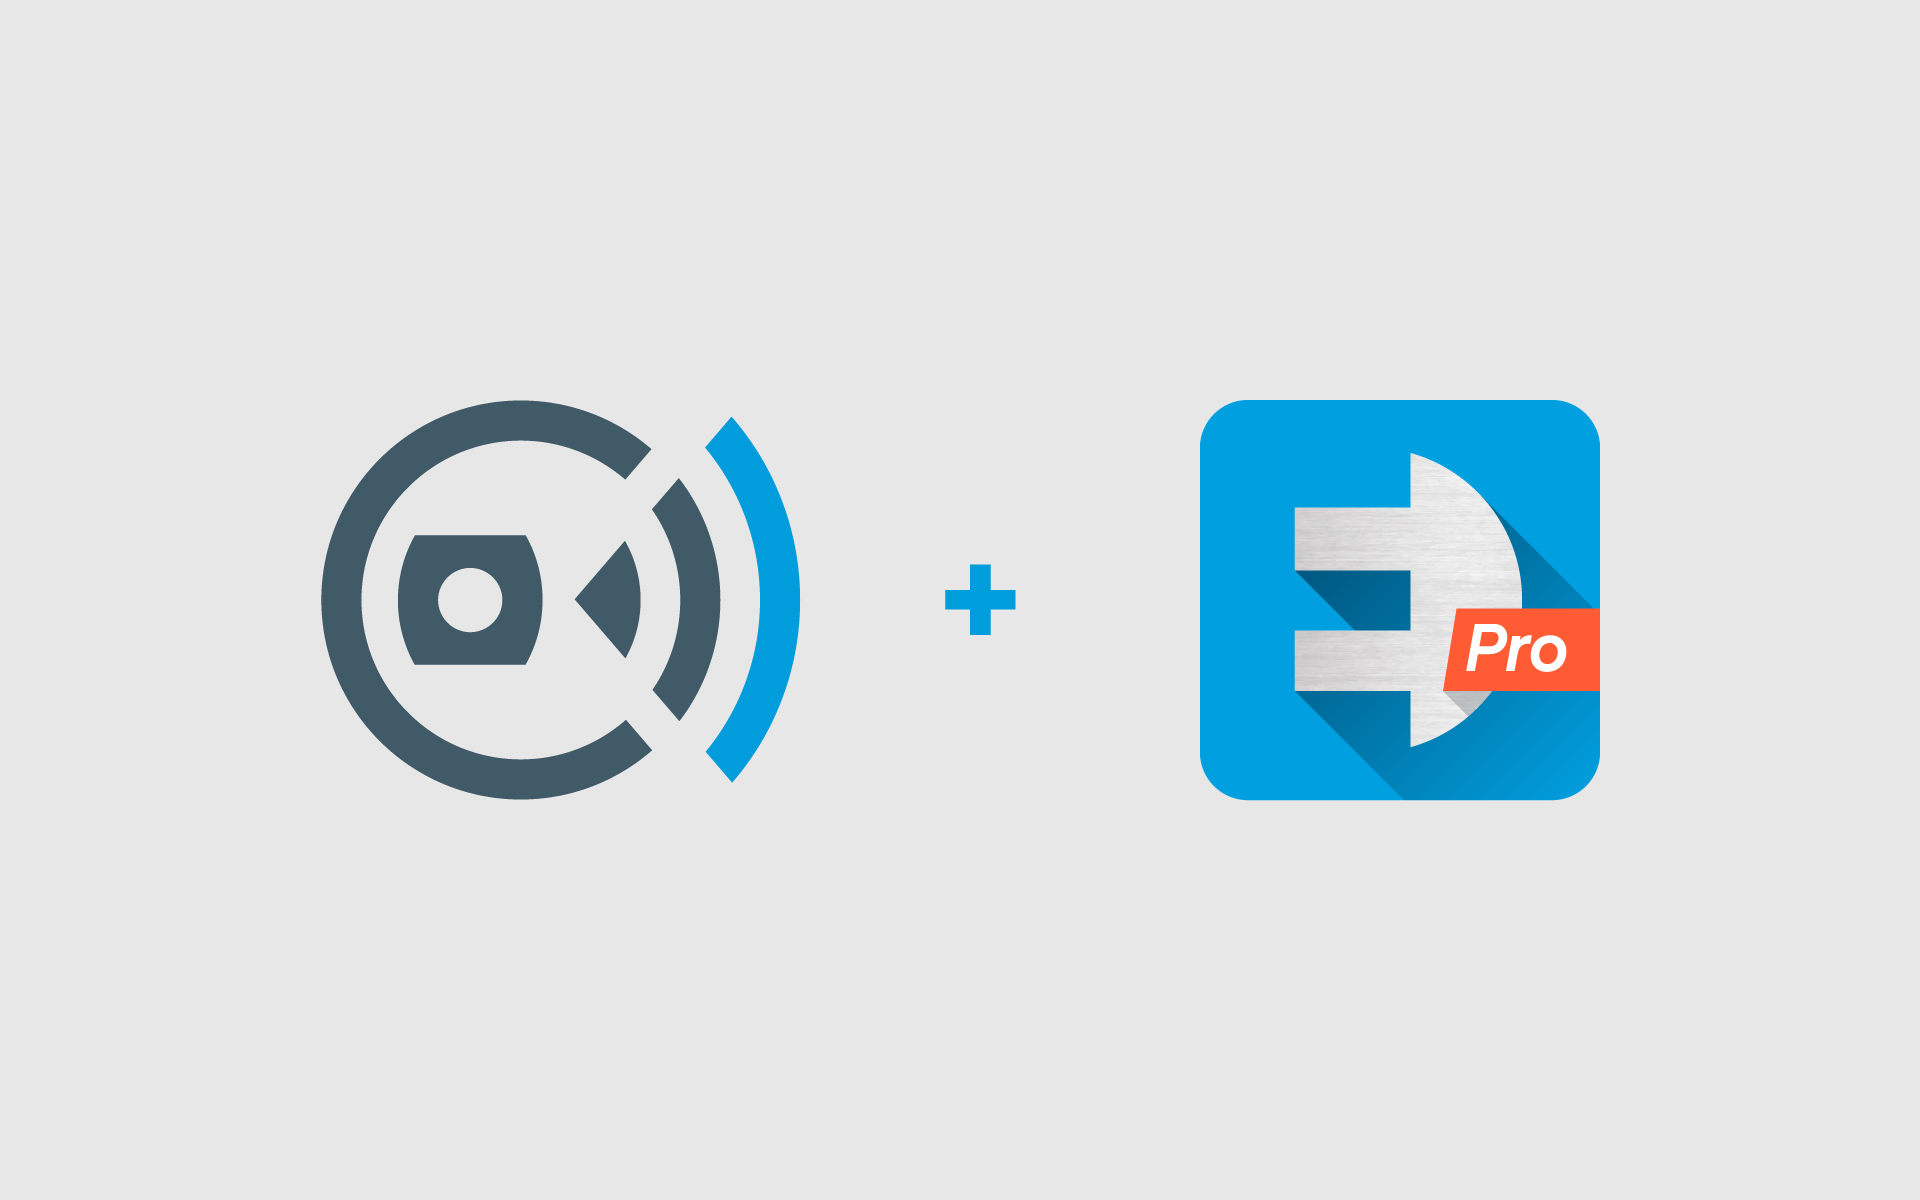 Remote Fitting and EXPRESSfit Pro Icons